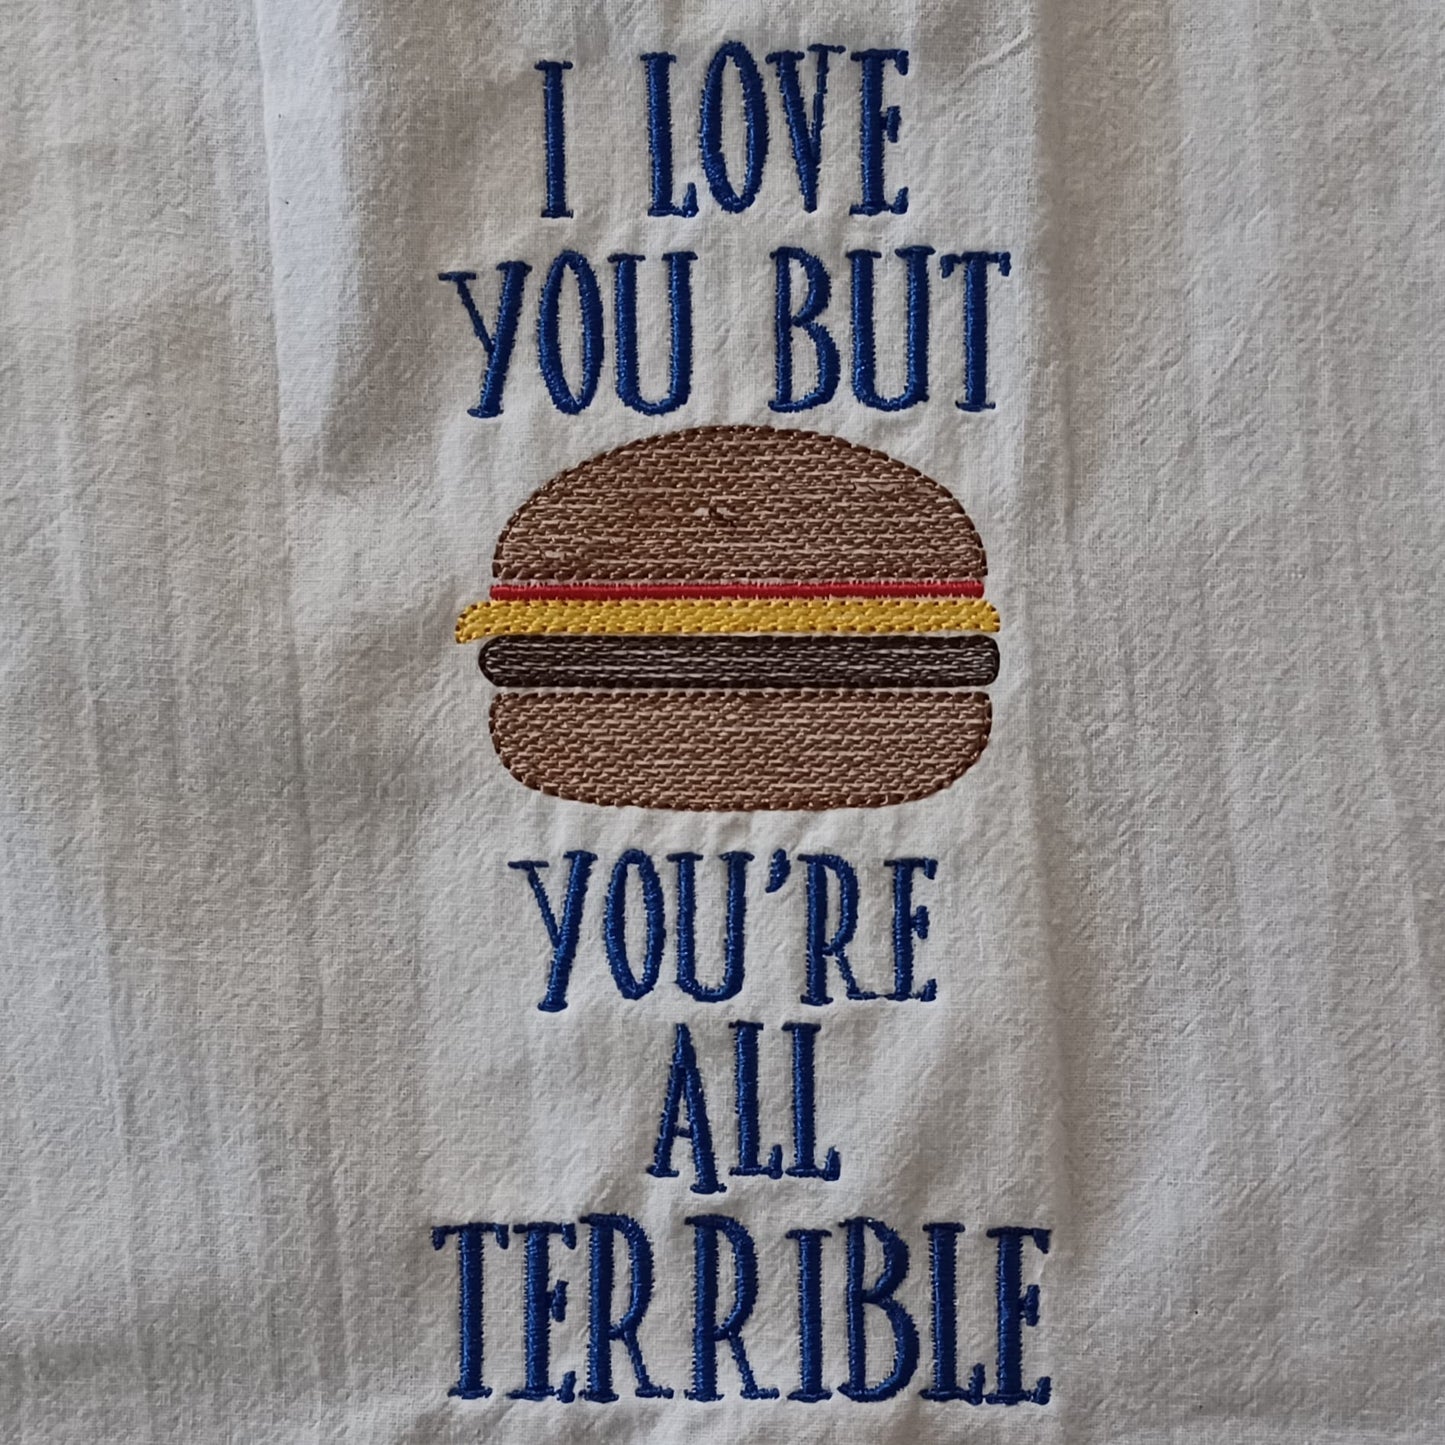 Burger Man "I Love You But You're All Terrible" (Embroidered CYO)